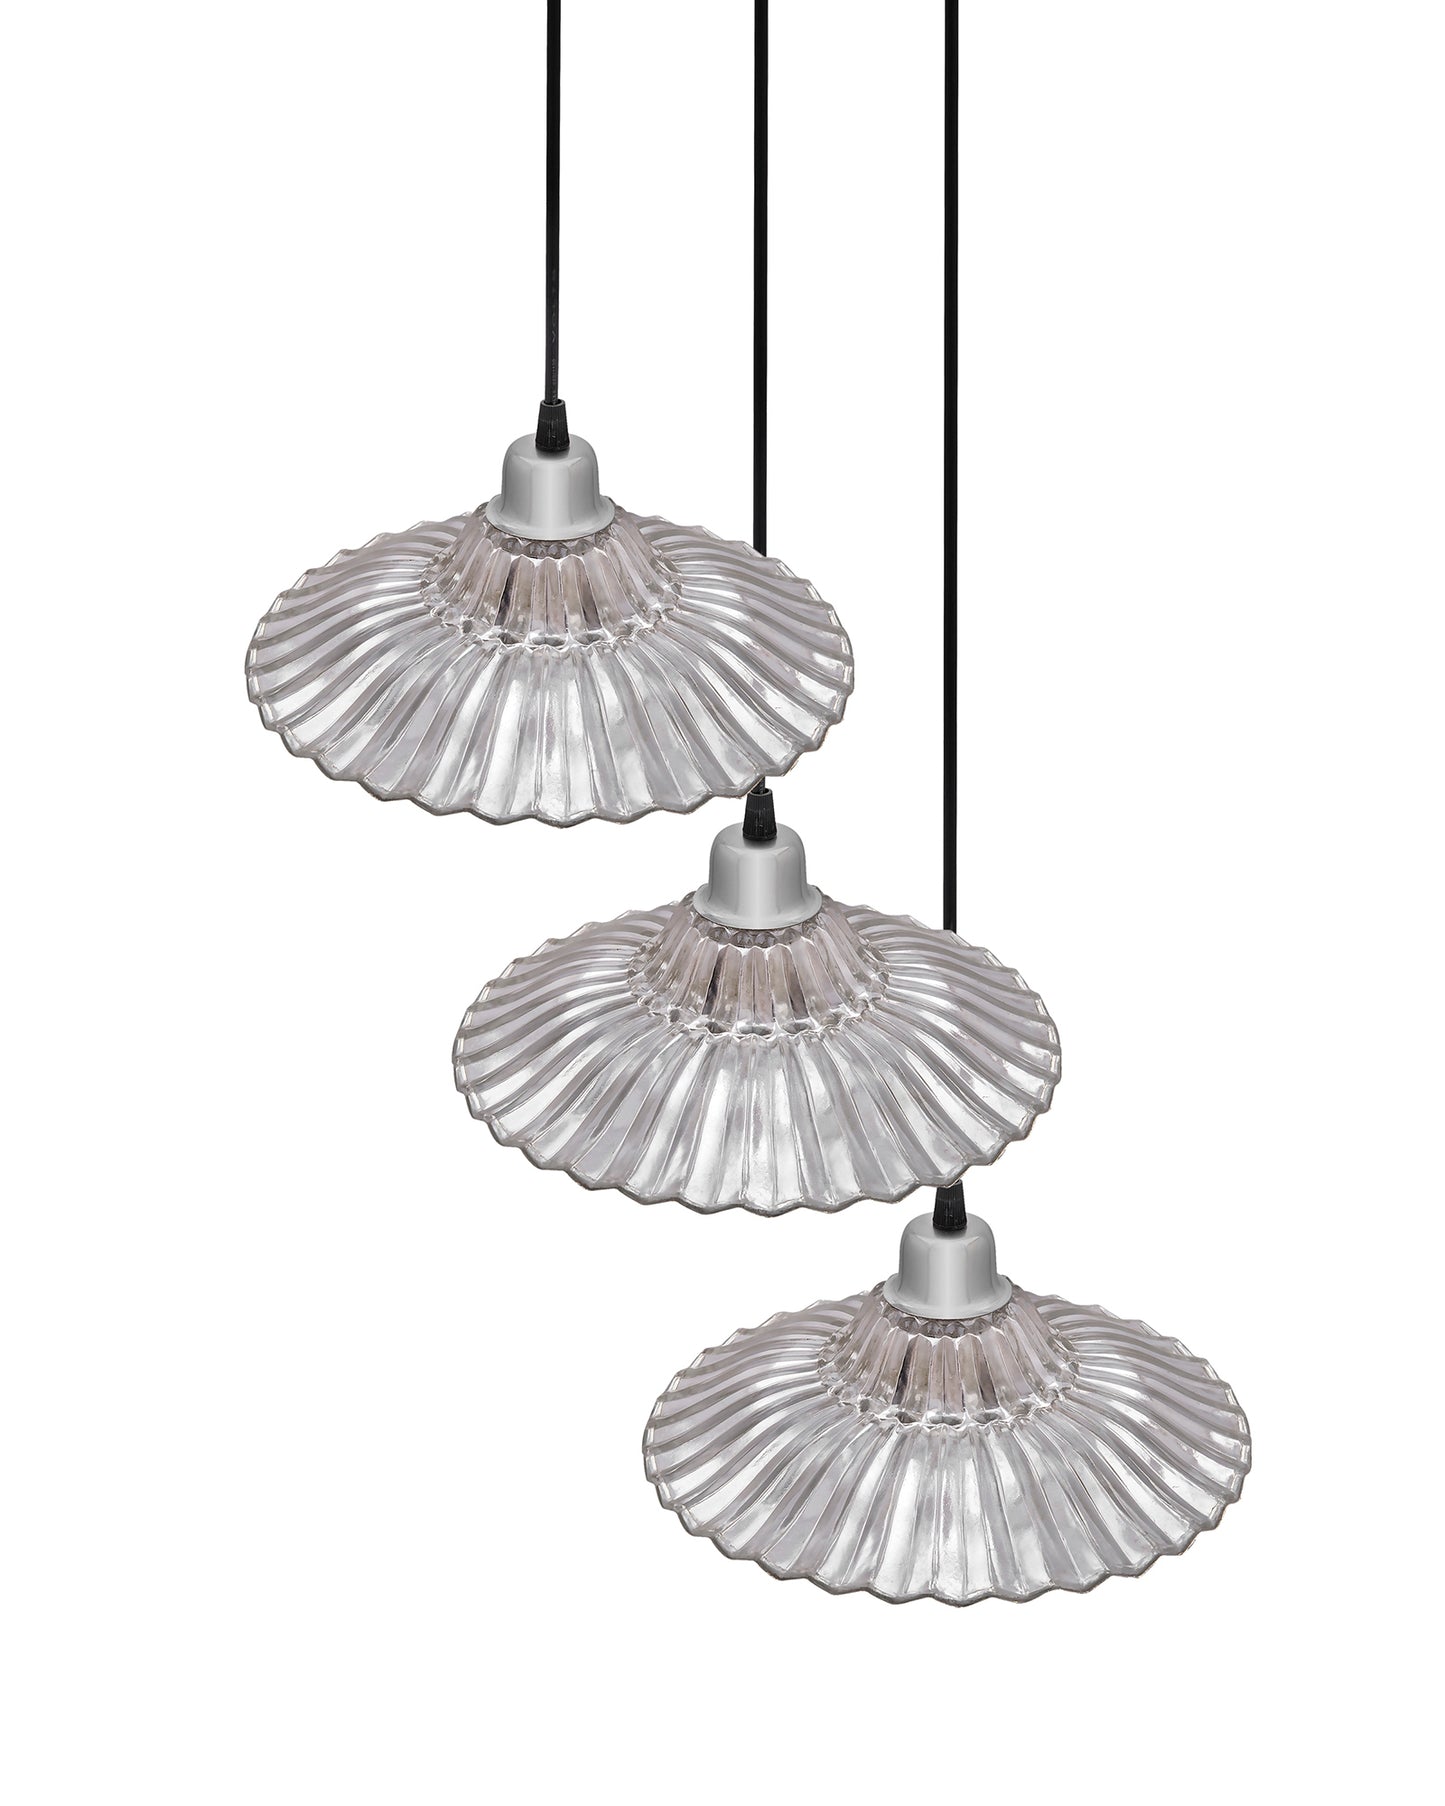 3-lights Round Cluster Chandelier Ceiling Ribbed Antique Silver Glass Hanging Pendant Light with Braided Cord, URBAN Retro, nordic style, LED/filament bulb